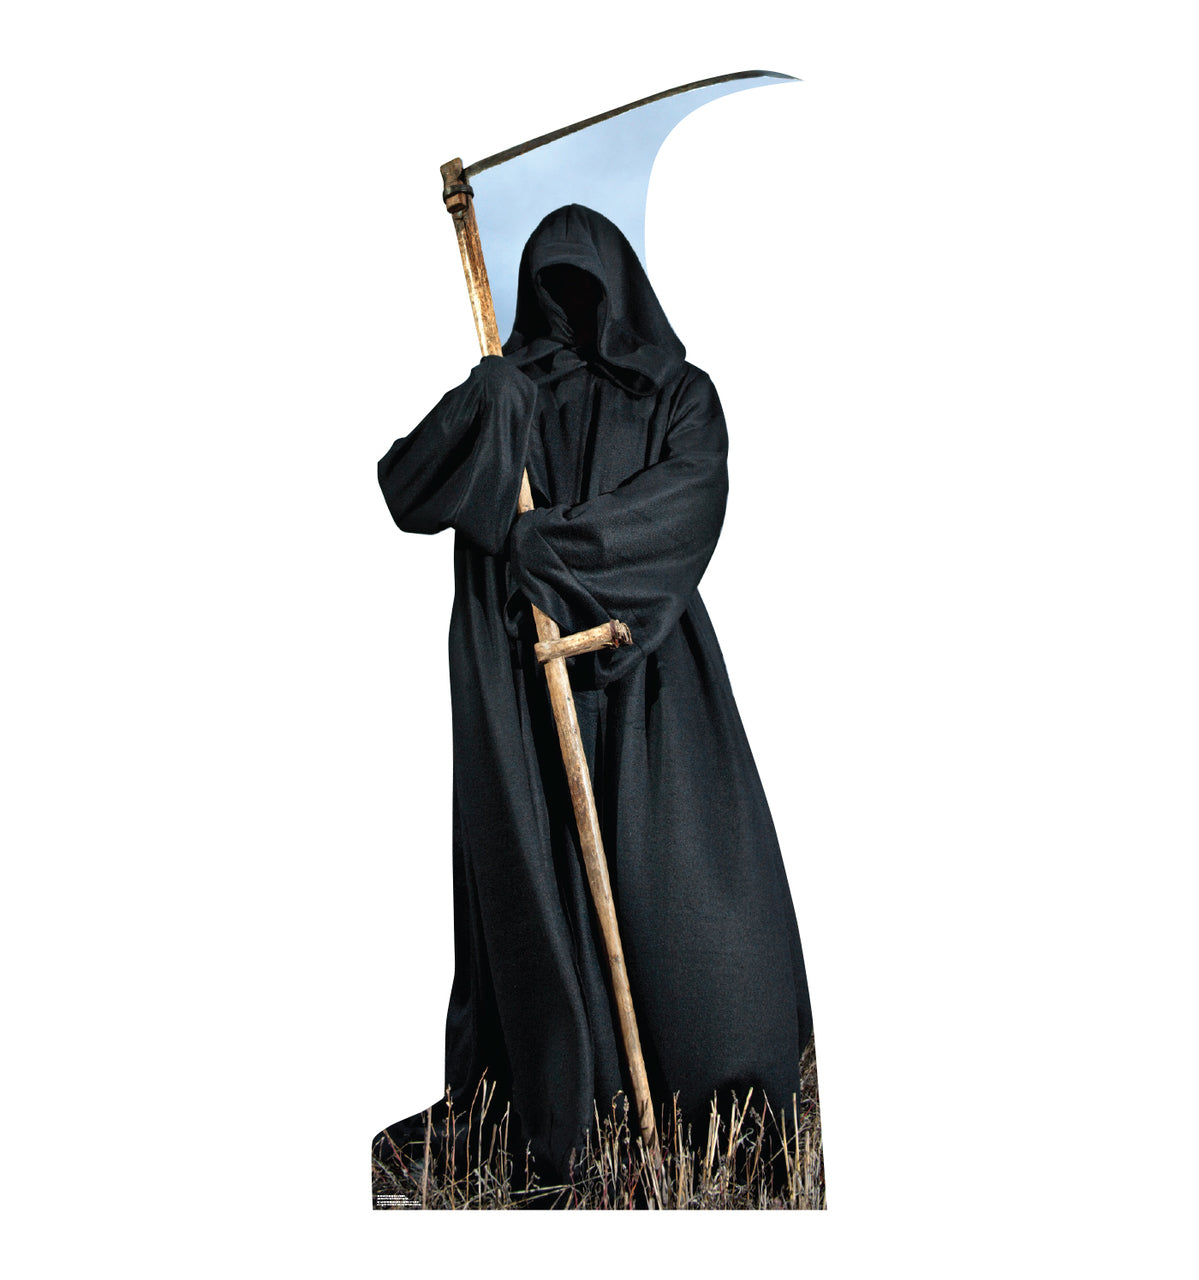 GRIM REAPER Lifesize Plastic Outdoor Cutout Standup Standee - Front